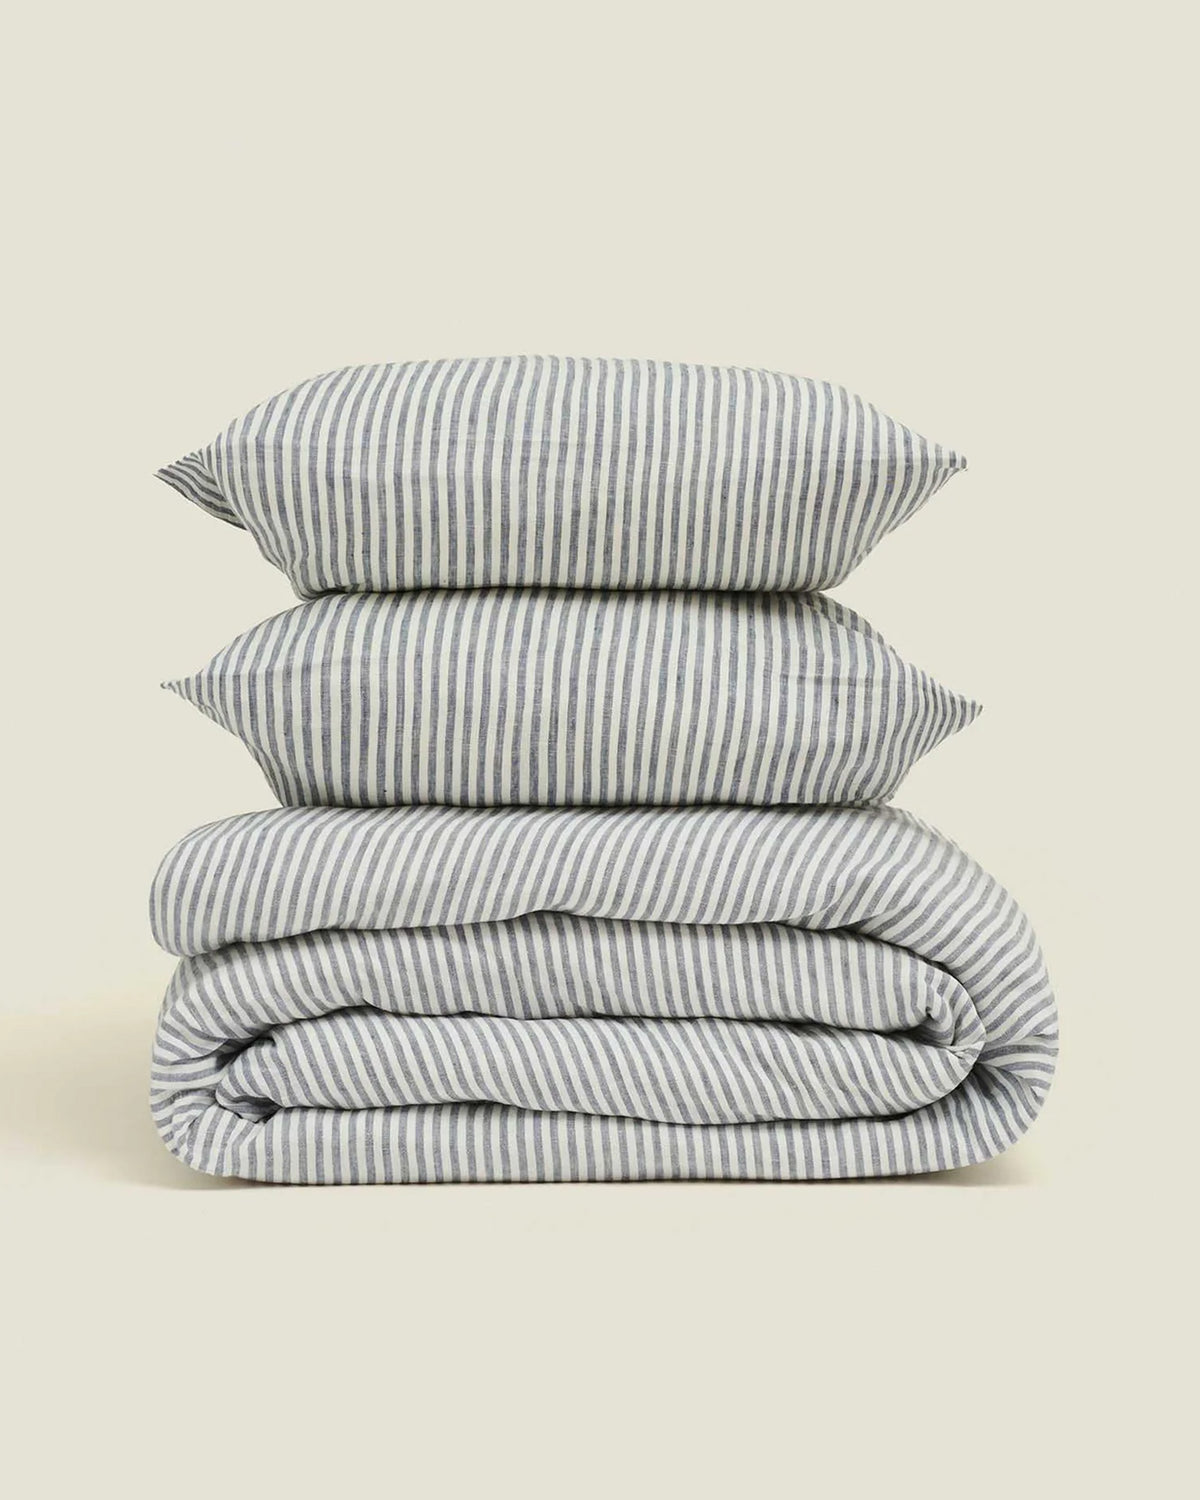 Bring a fresh look to your kids bedrooms with this Blue Stripe Duvet Set. 100% French linen finished with a cute tie detail to create a natural look and to ensure making your kids' bed is easy. Available in single, double and queen sizes.